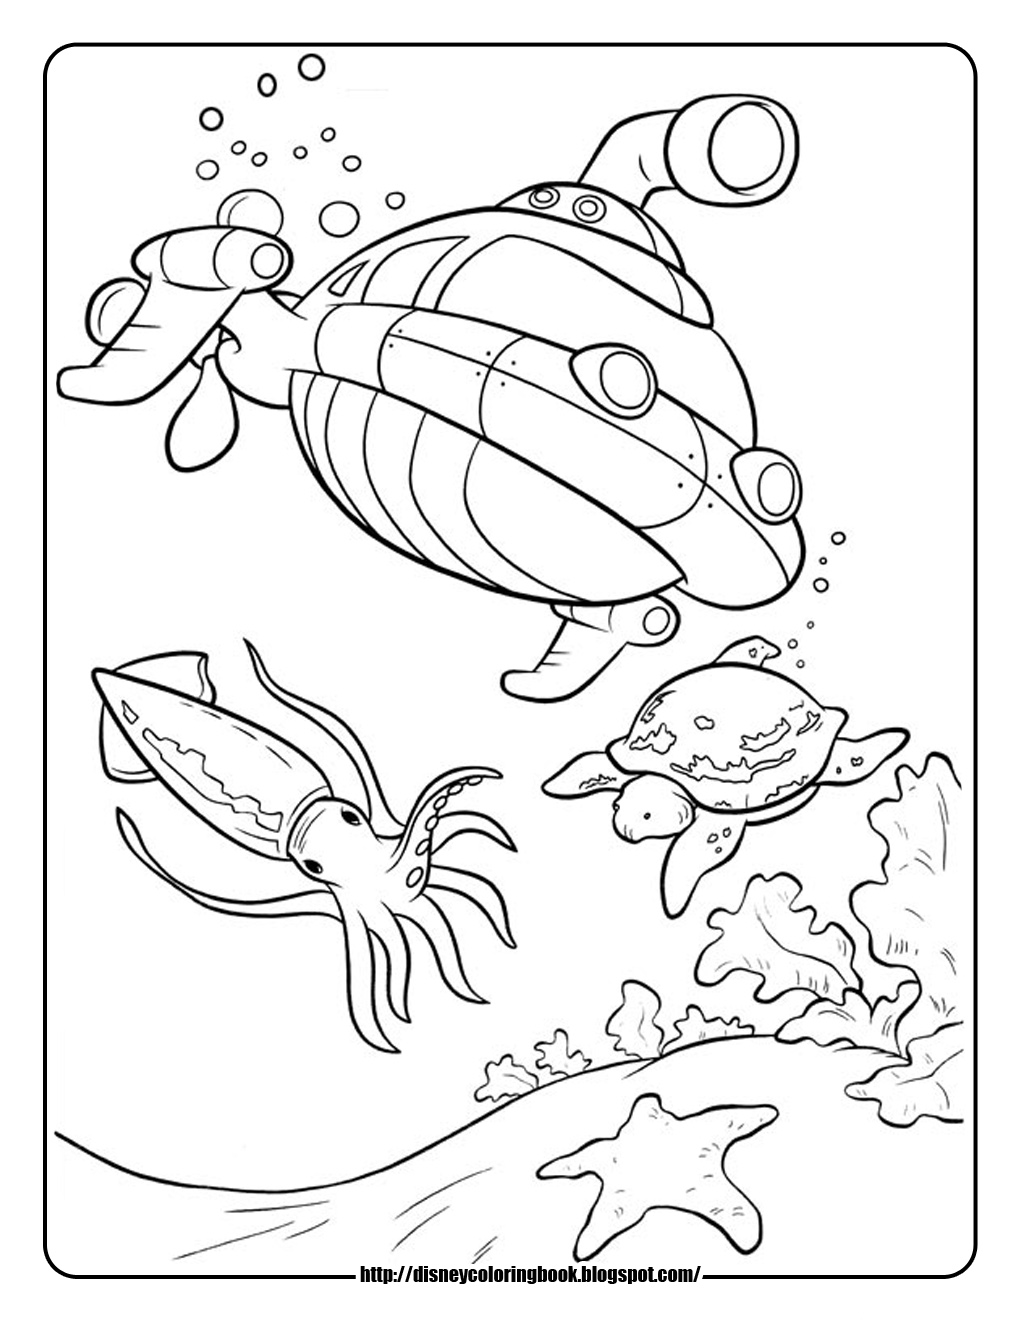 Disney Coloring Pages And Sheets For Kids Little Einsteins 2 Free Disney Coloring Sheets